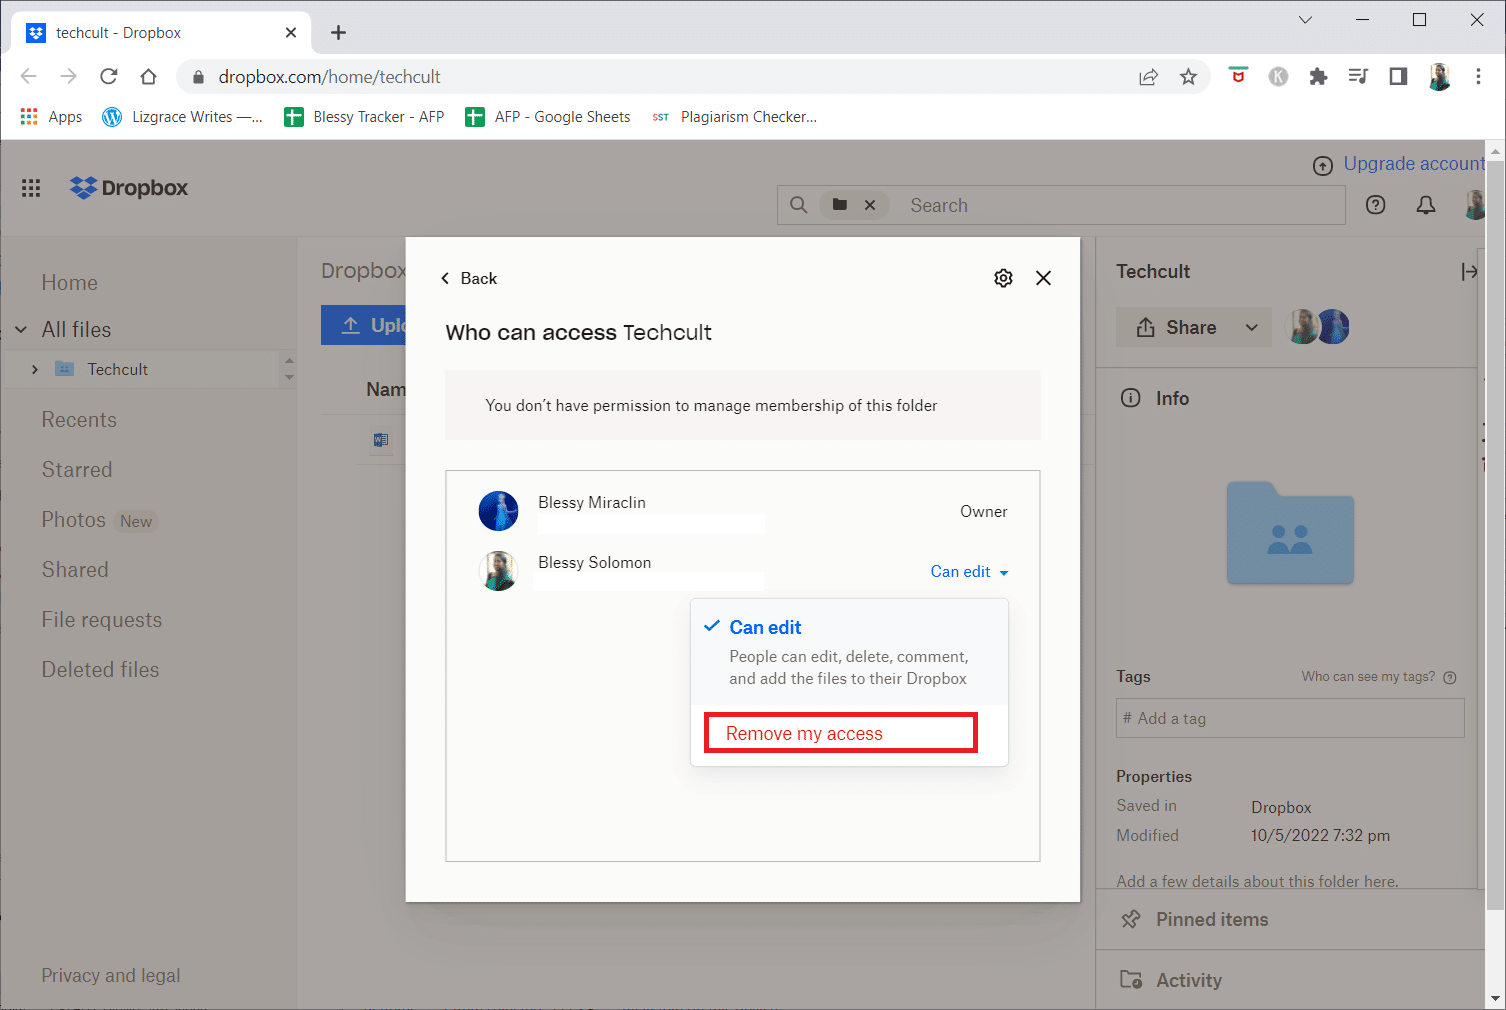 click on the Remove my access option from the drop-down menu